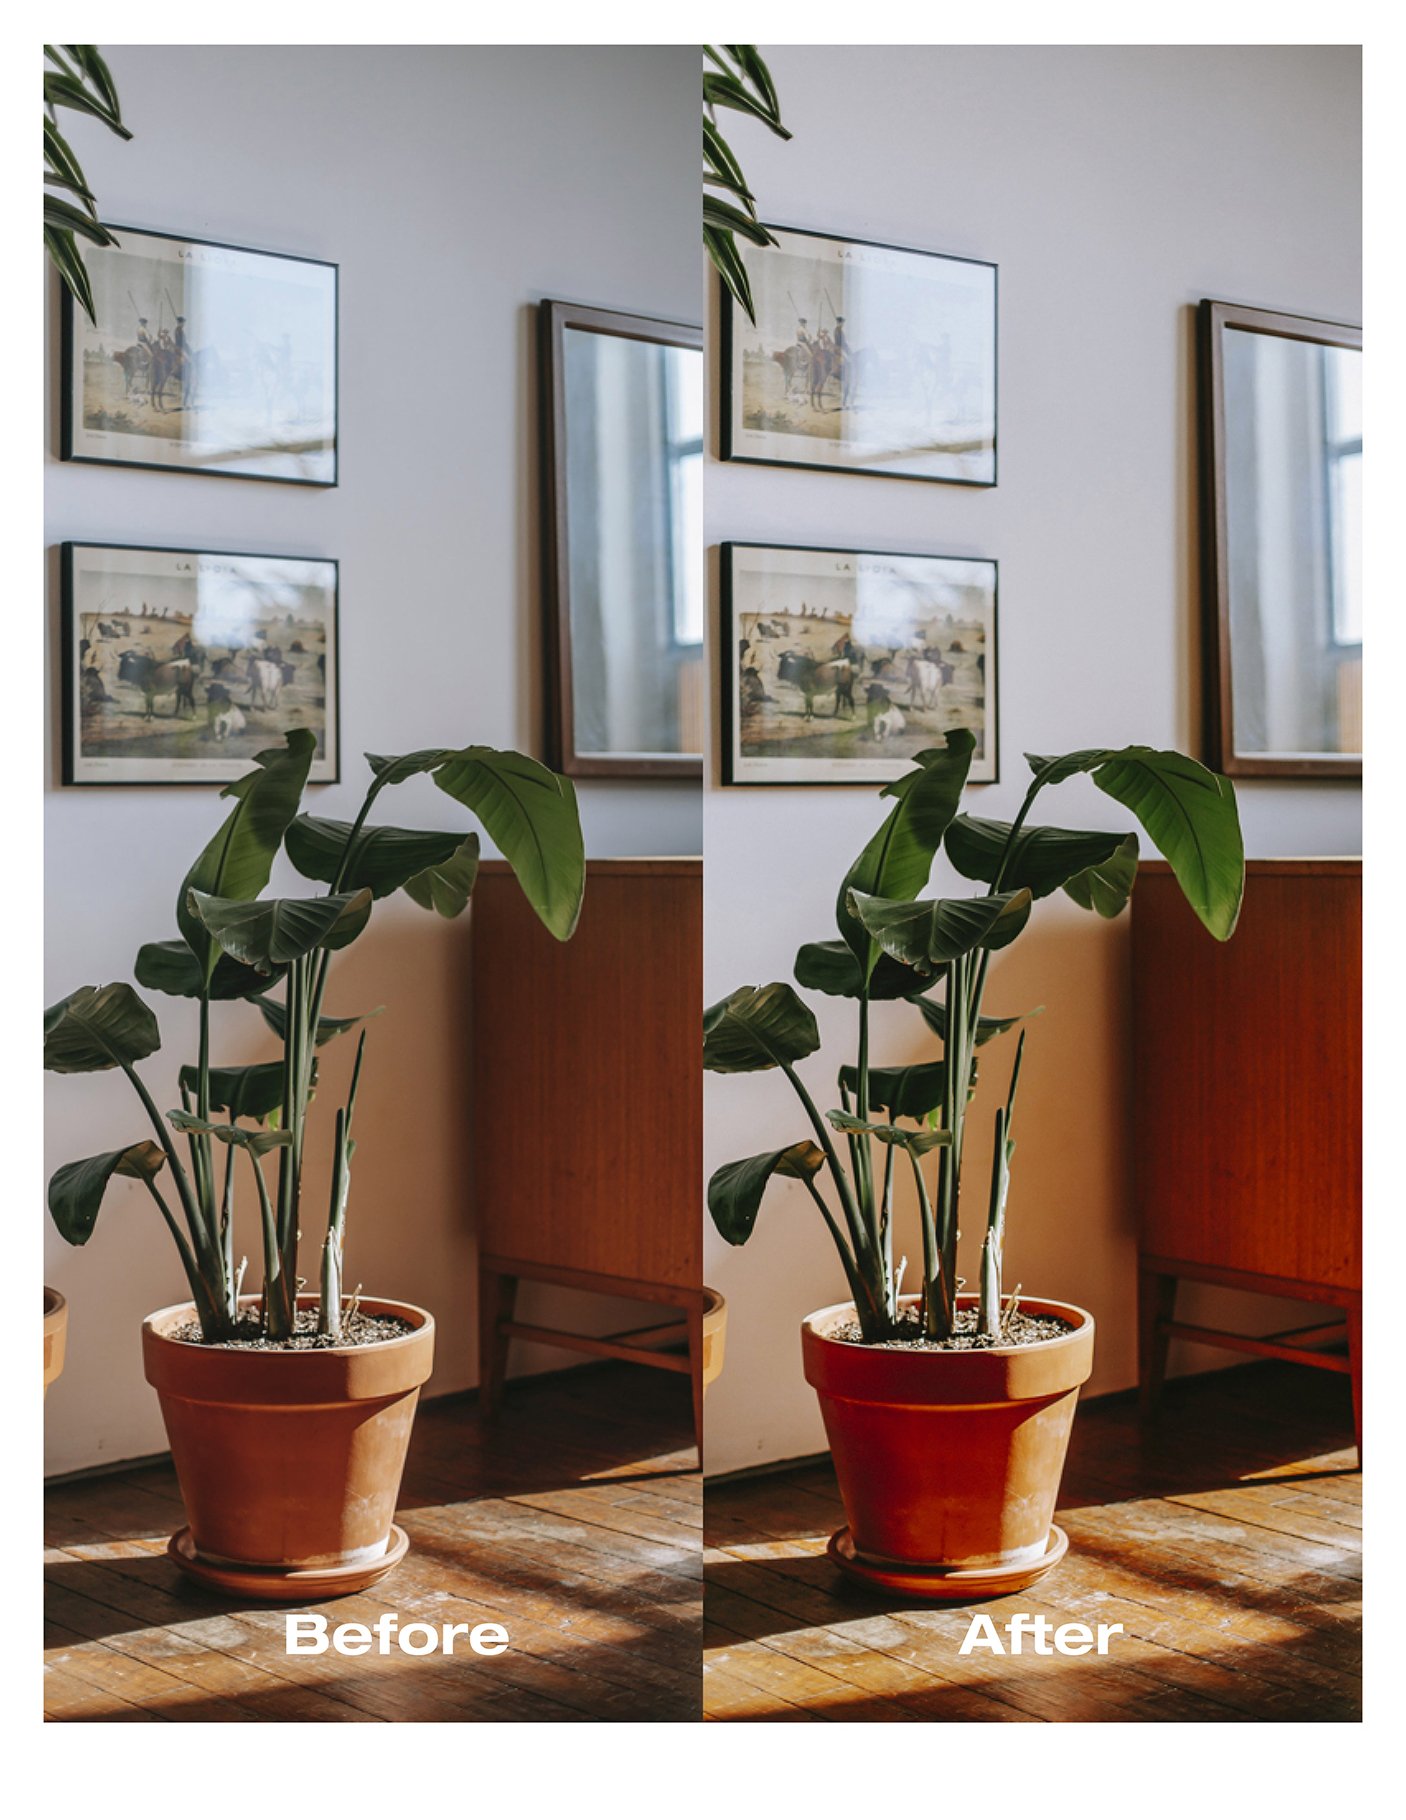 fujifilm 160c before after 02 482